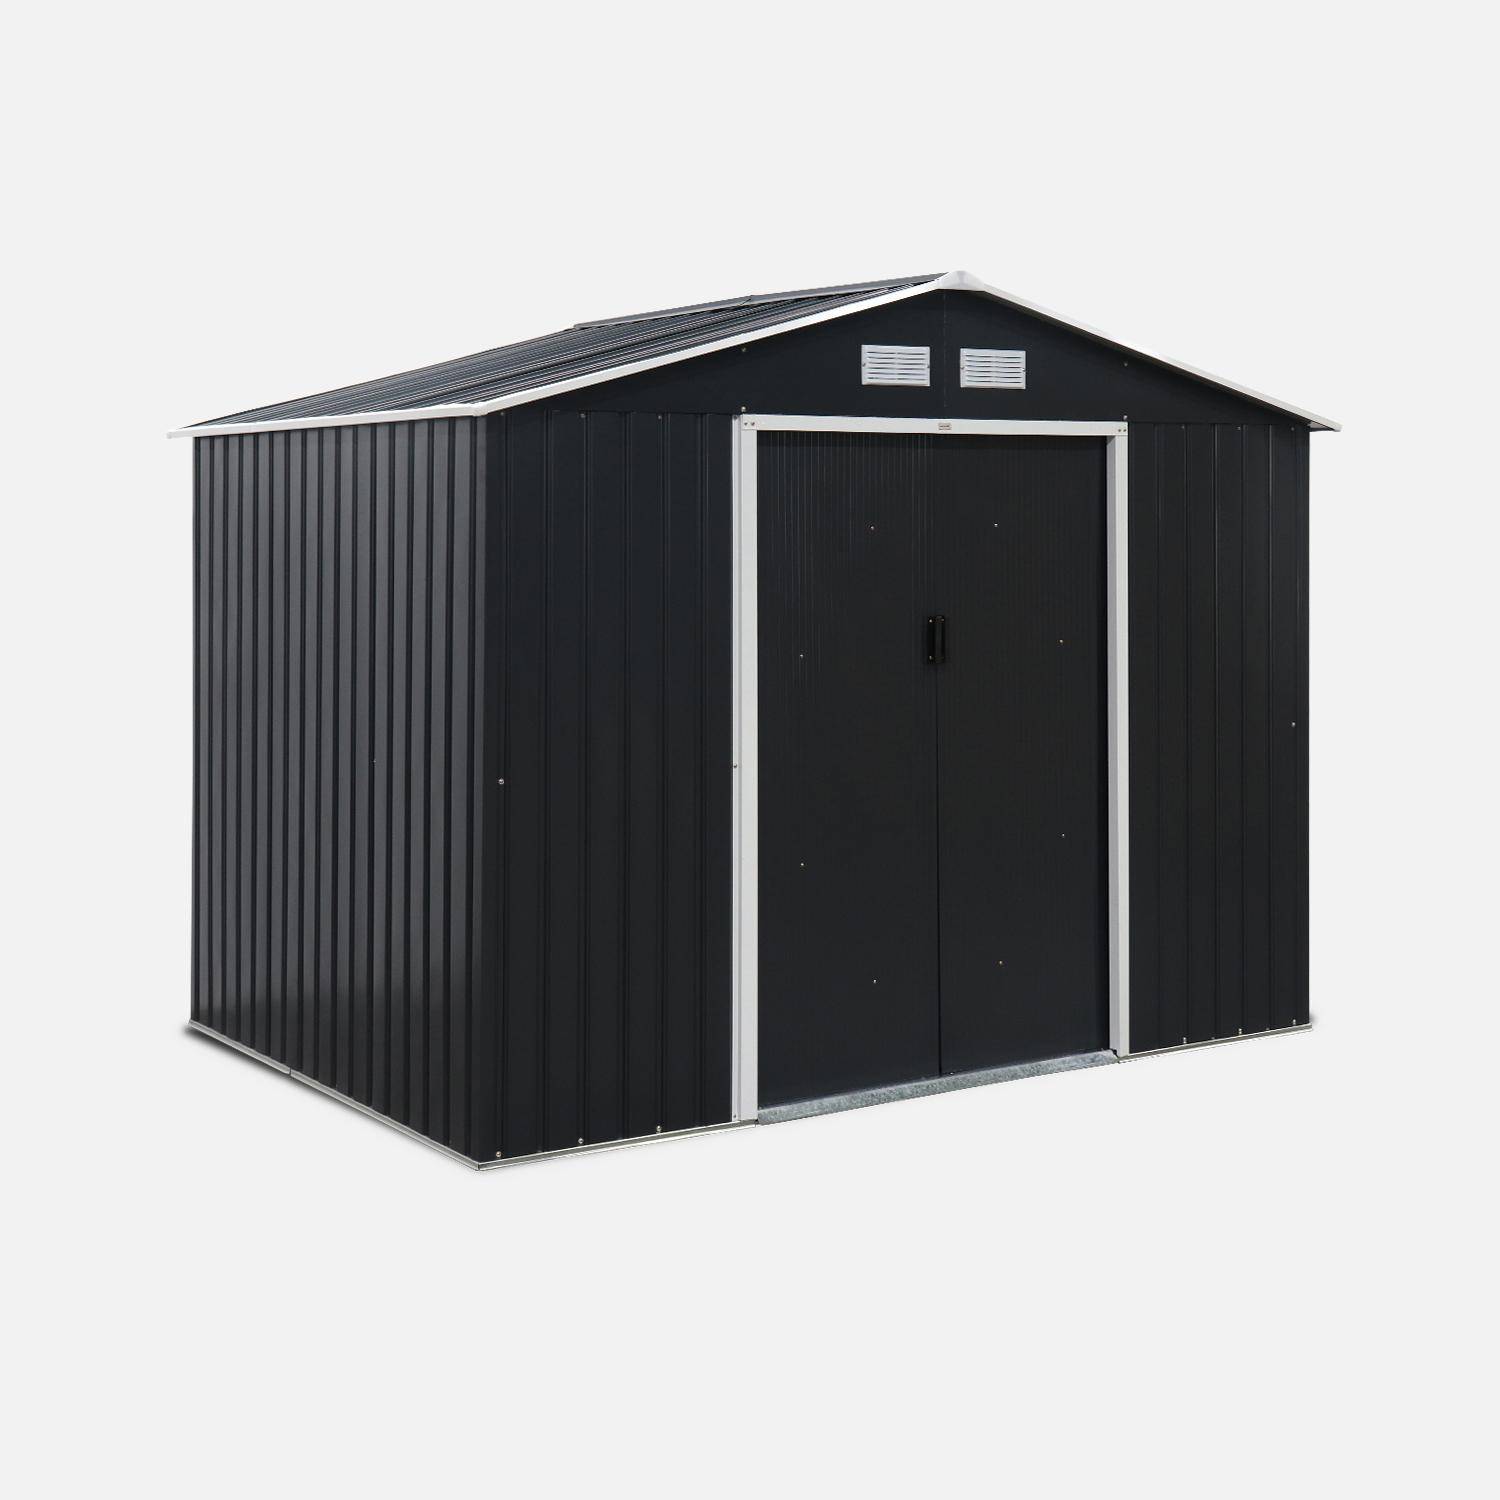 (9 X 6FT) 5.39m² Metal garden shed - Tool shed with single latch door, ground fixing kit supplied - Ferrain - Grey and White Photo2